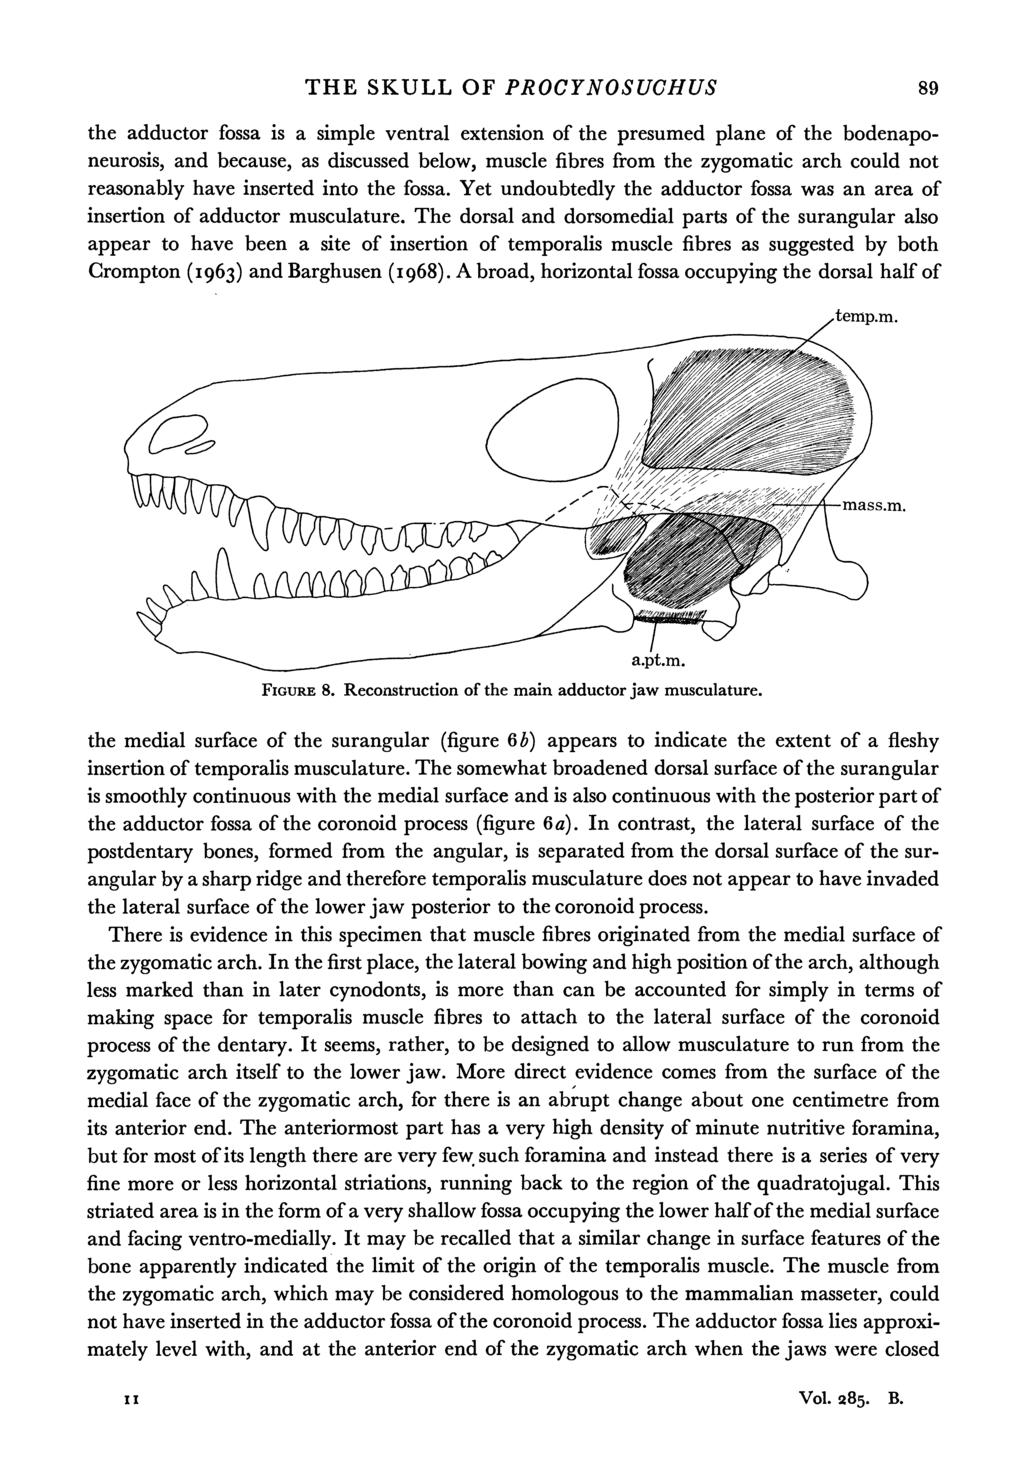 THE SKULL OF PROCYNOSUCHUS 89 the adductor fossa is a simple ventral extension of the presumed plane of the bodenaponeurosis, and because, as discussed below, muscle fibres from the zygomatic arch